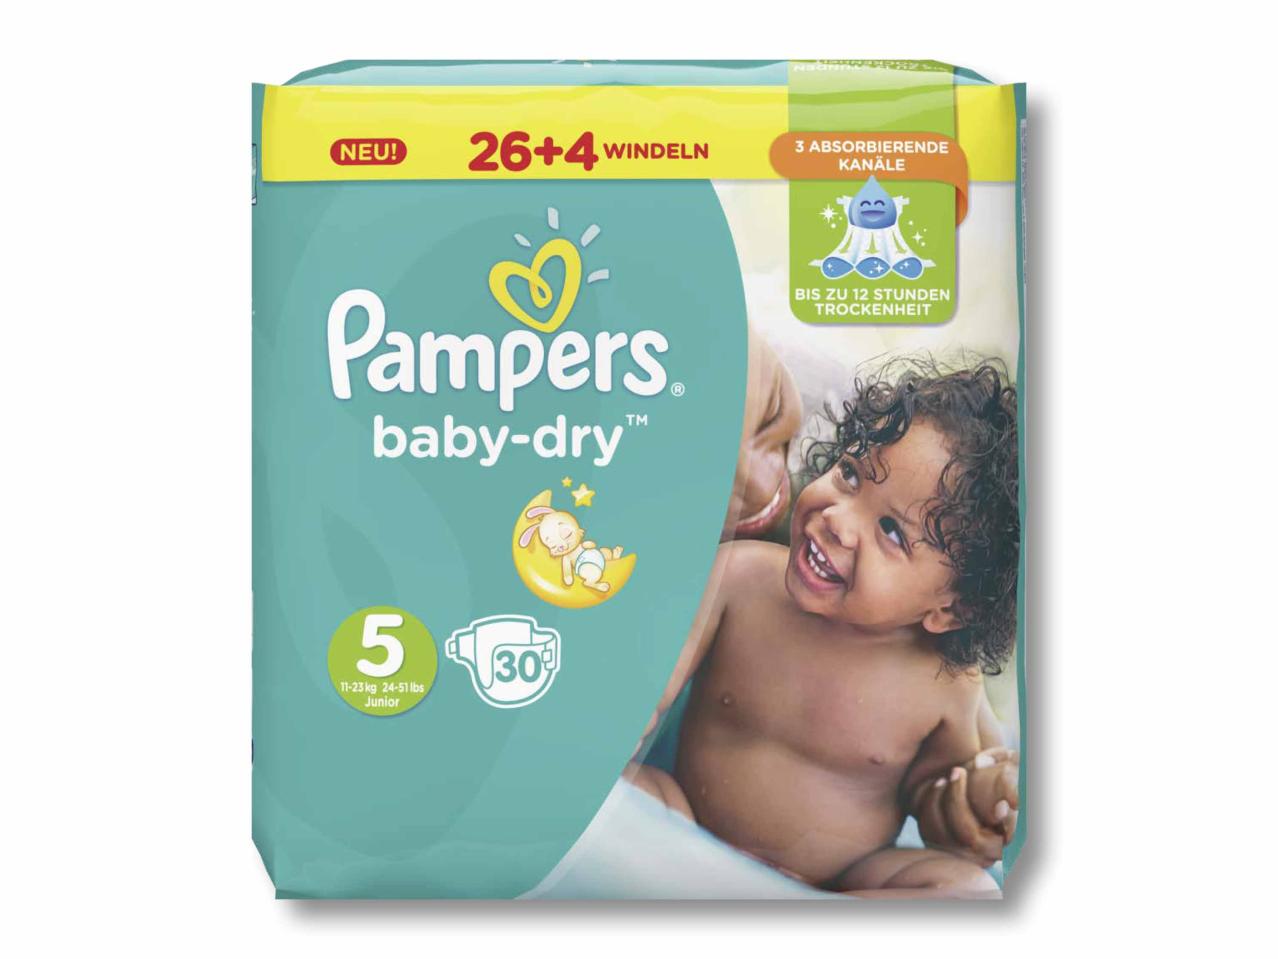 Pannolini Pampers Baby-dry